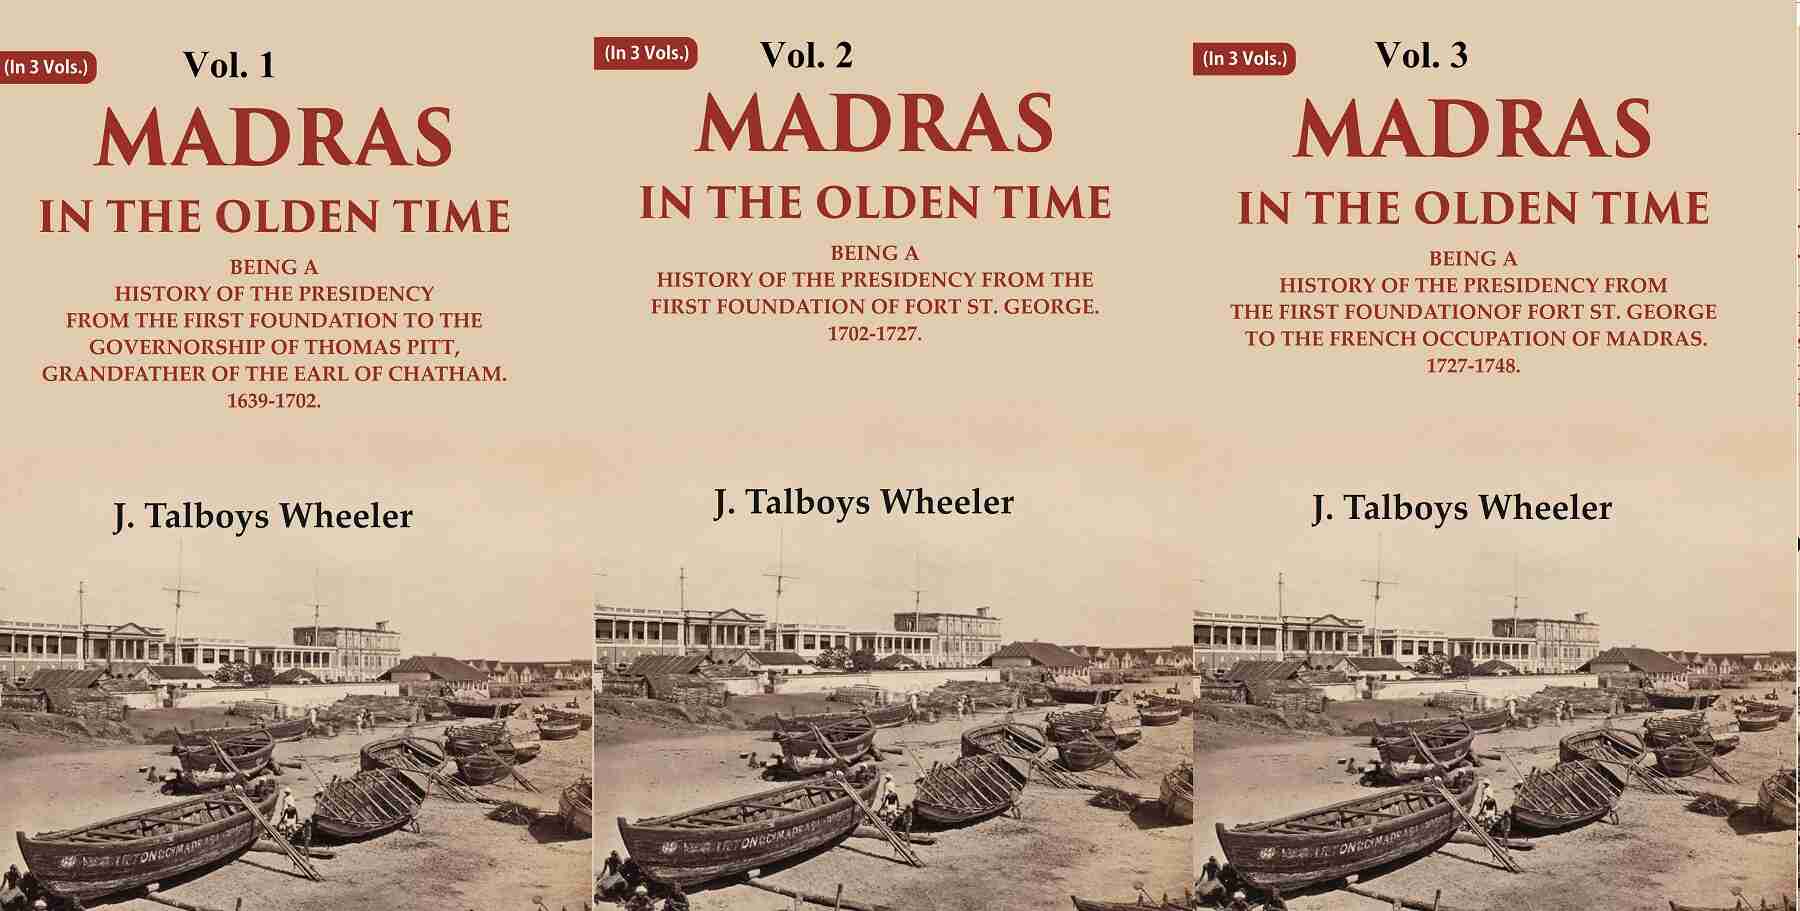 Madras in the Olden Time Being a History of the Presidency, 1639-1748